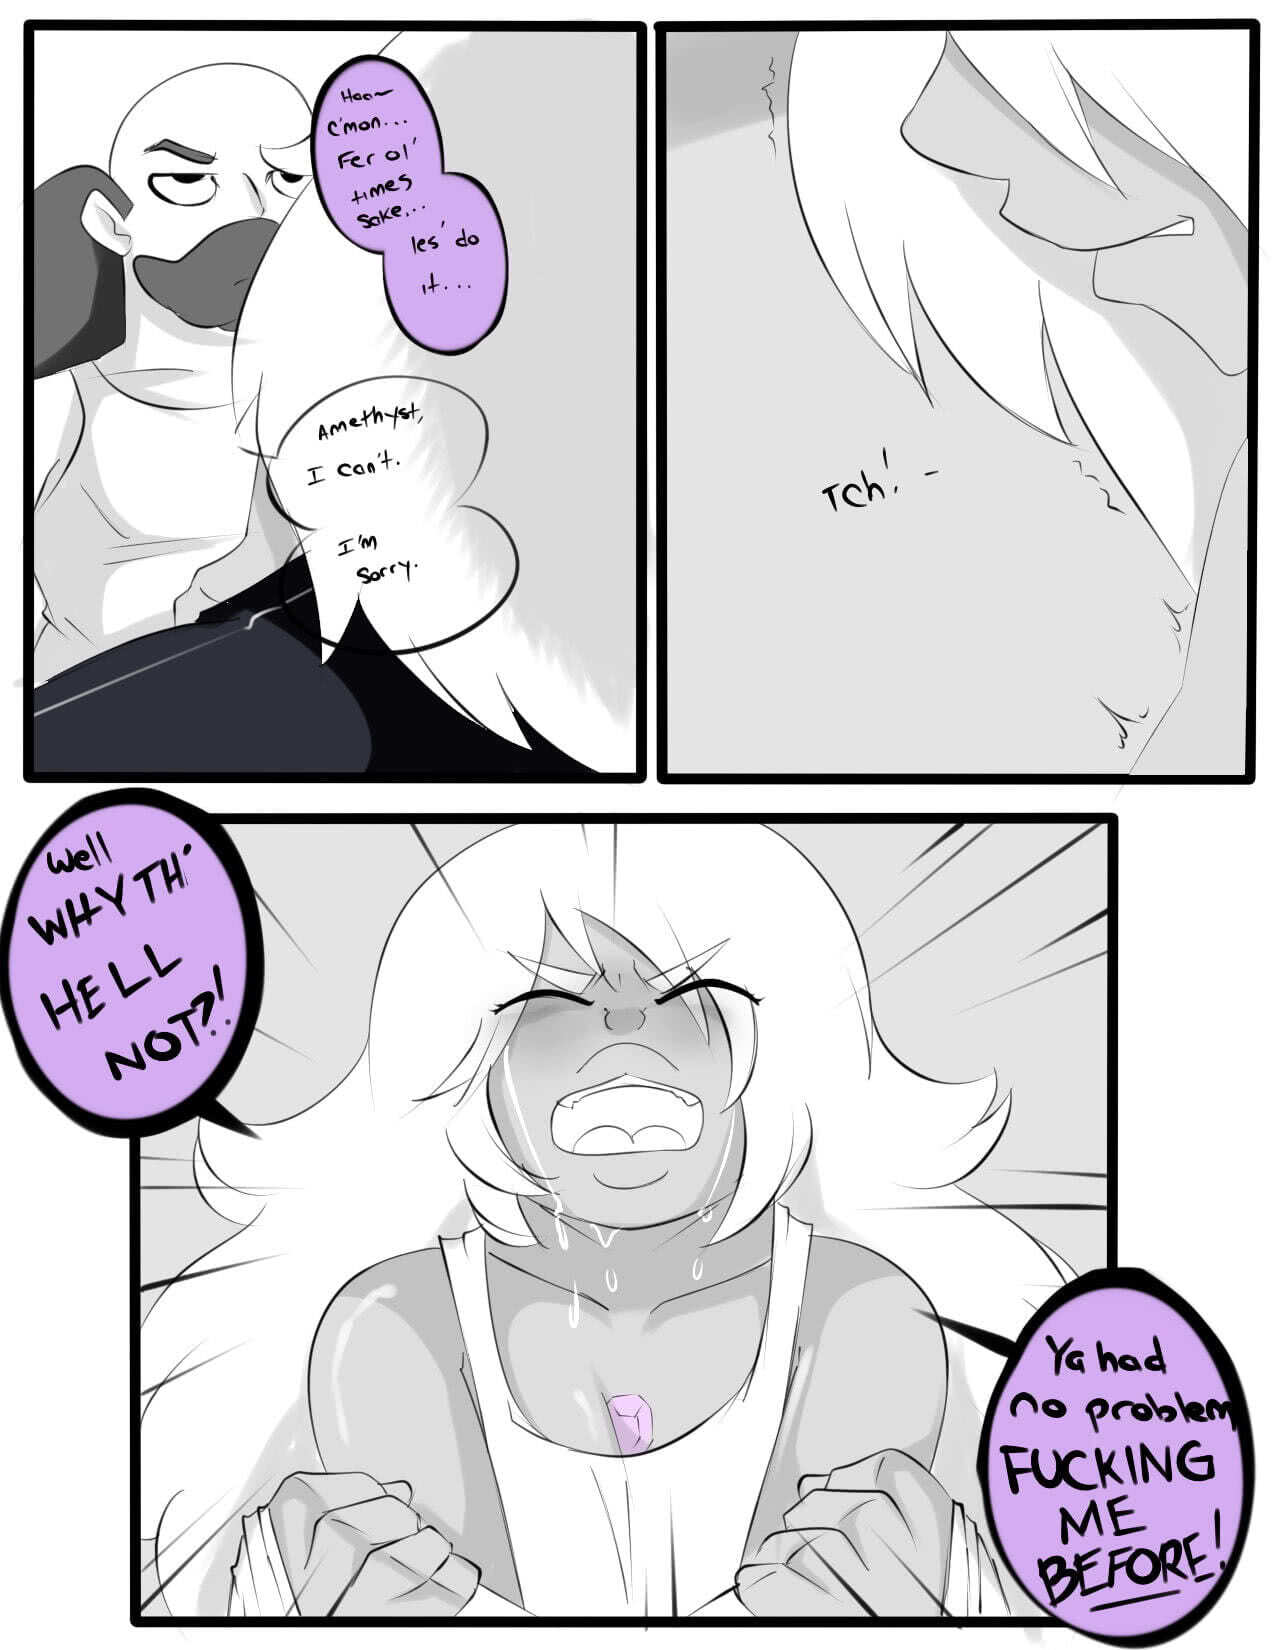 Amethyst's drinking problem - Page 3